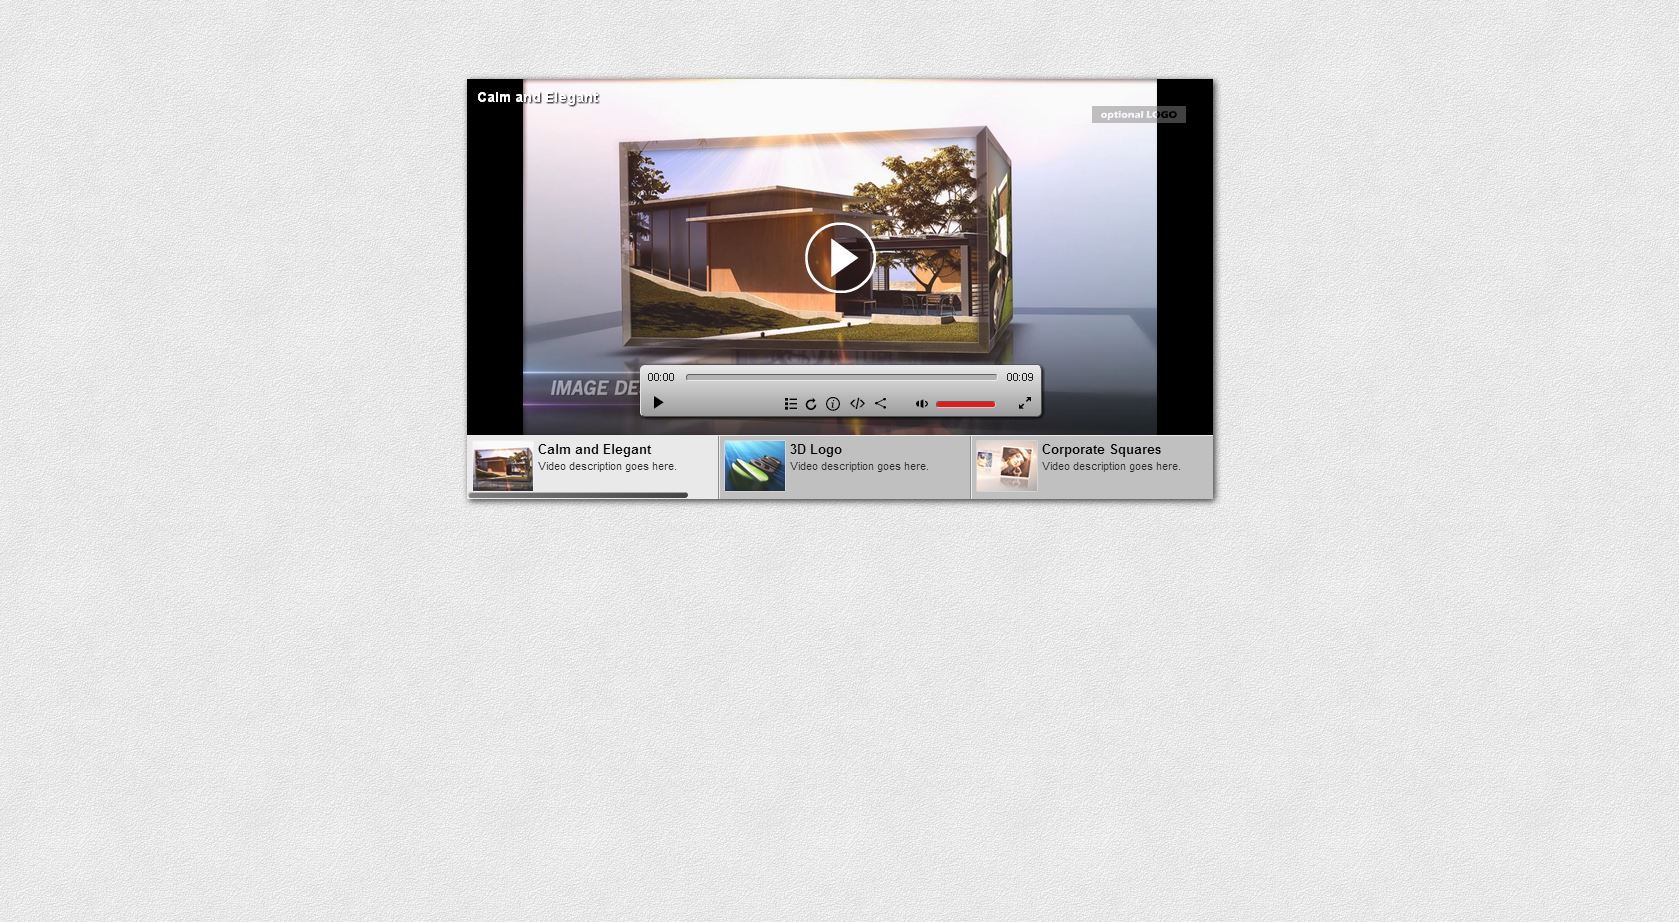 html5 video player local file